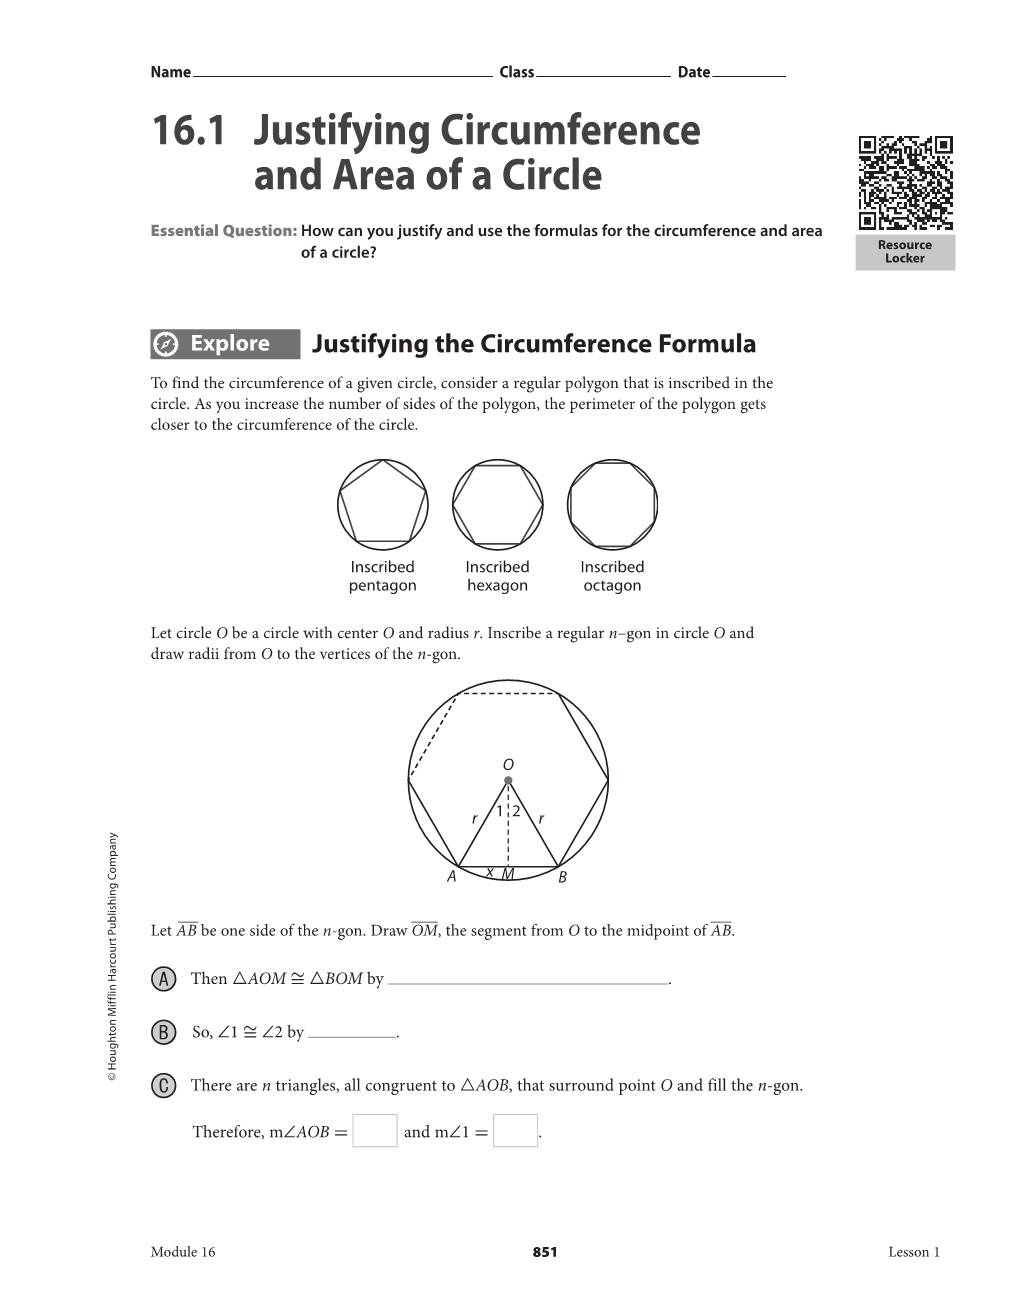 16.1 Justifying Circumference and Area of a Circle